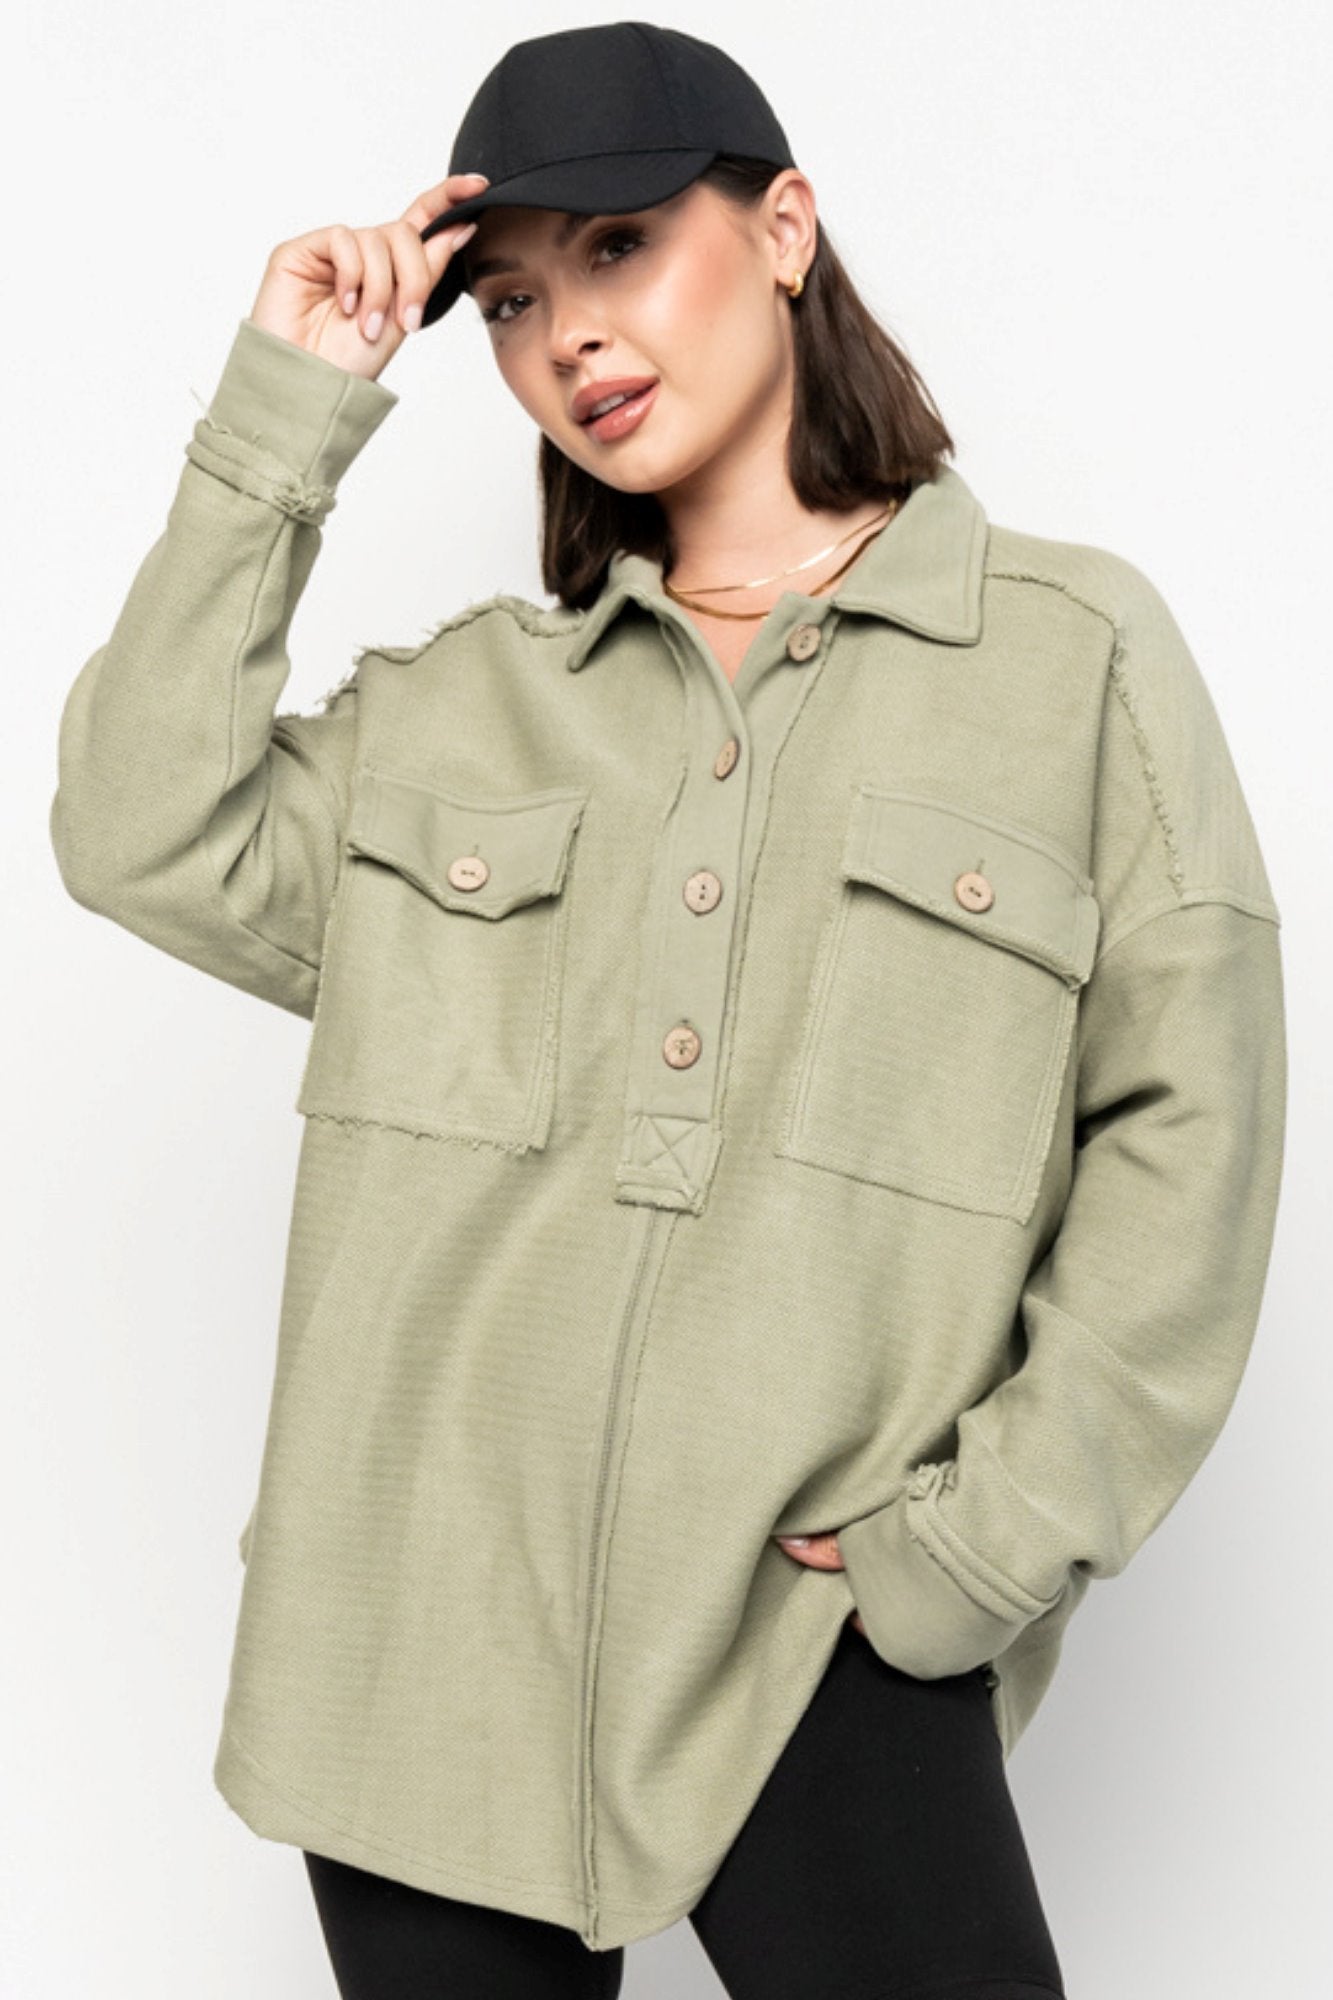 Kennedy Pullover in Sage Clothing Holley Girl 